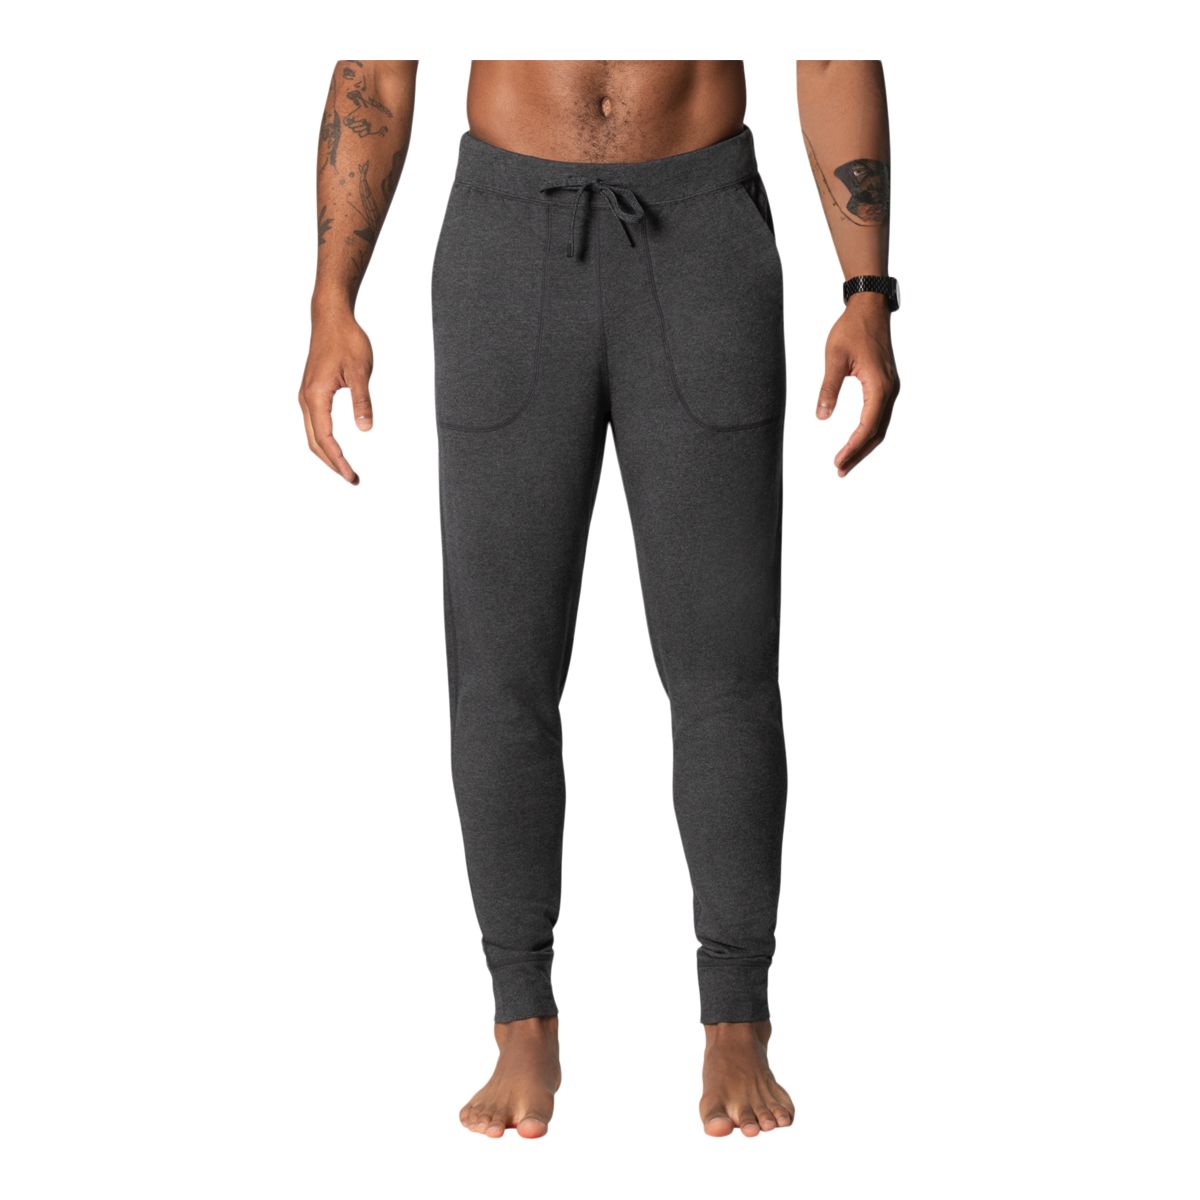 Saxx Men's 3Six Draw String Waist Band Relaxed Fit Lounge Pants